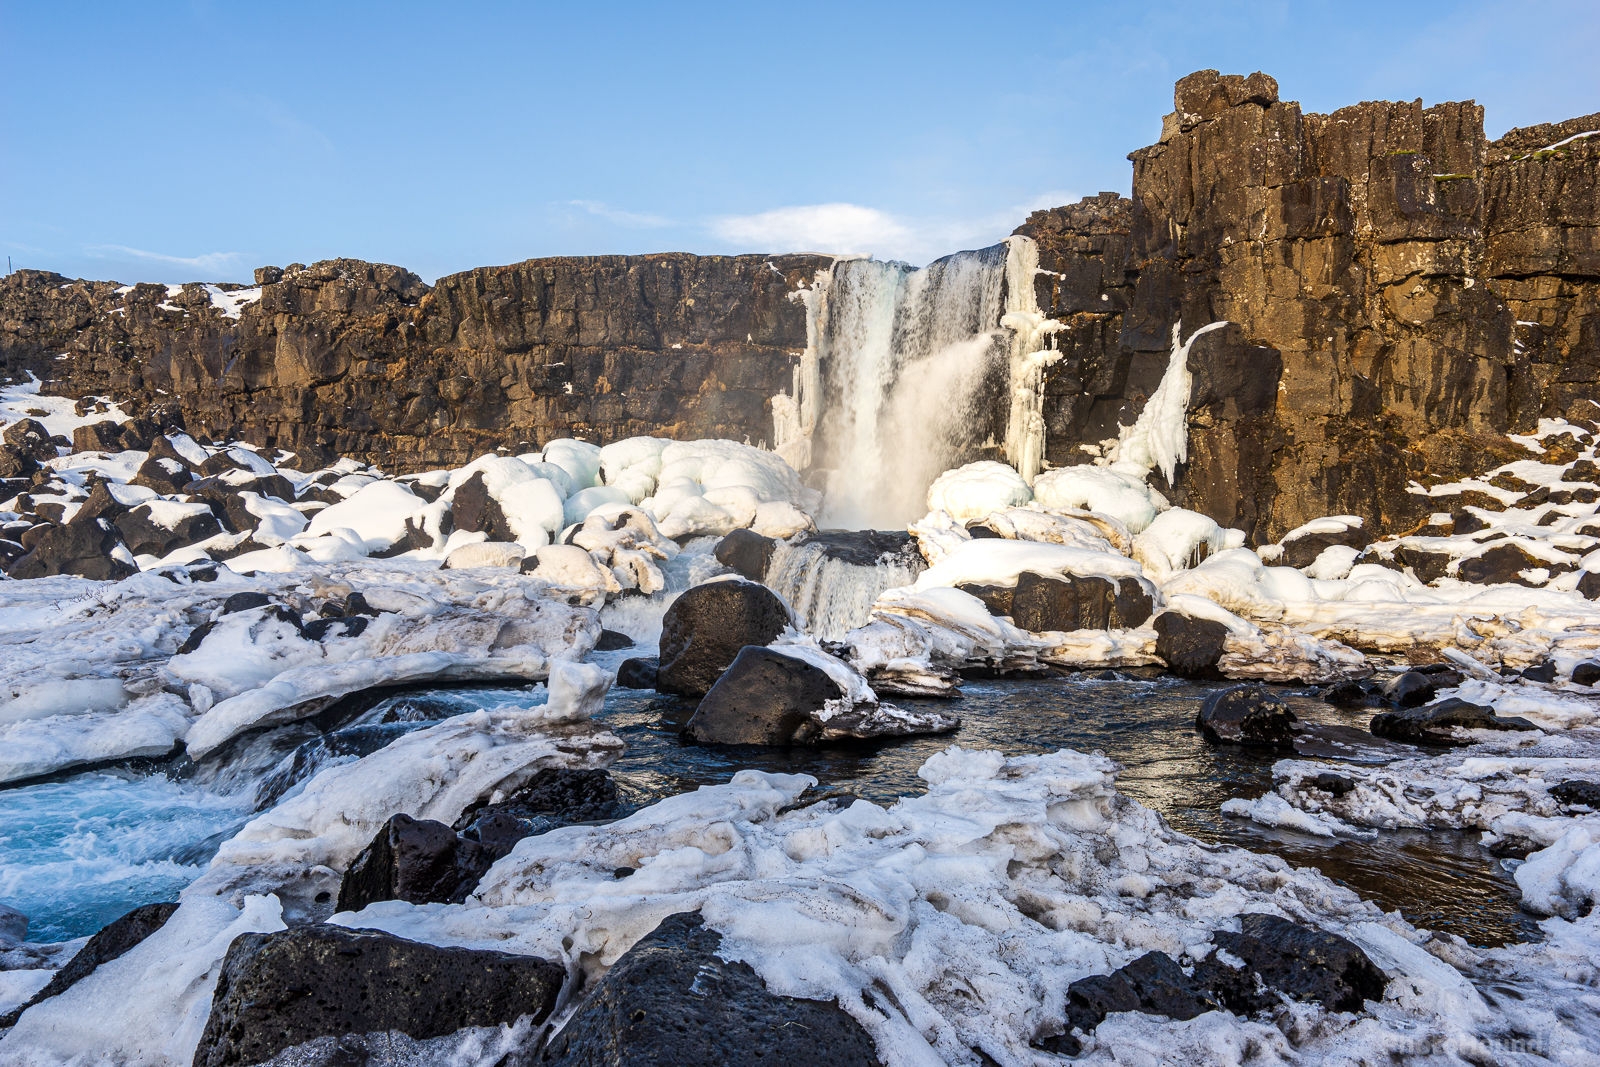 Image of Oxararfoss Waterfall by James Billings.